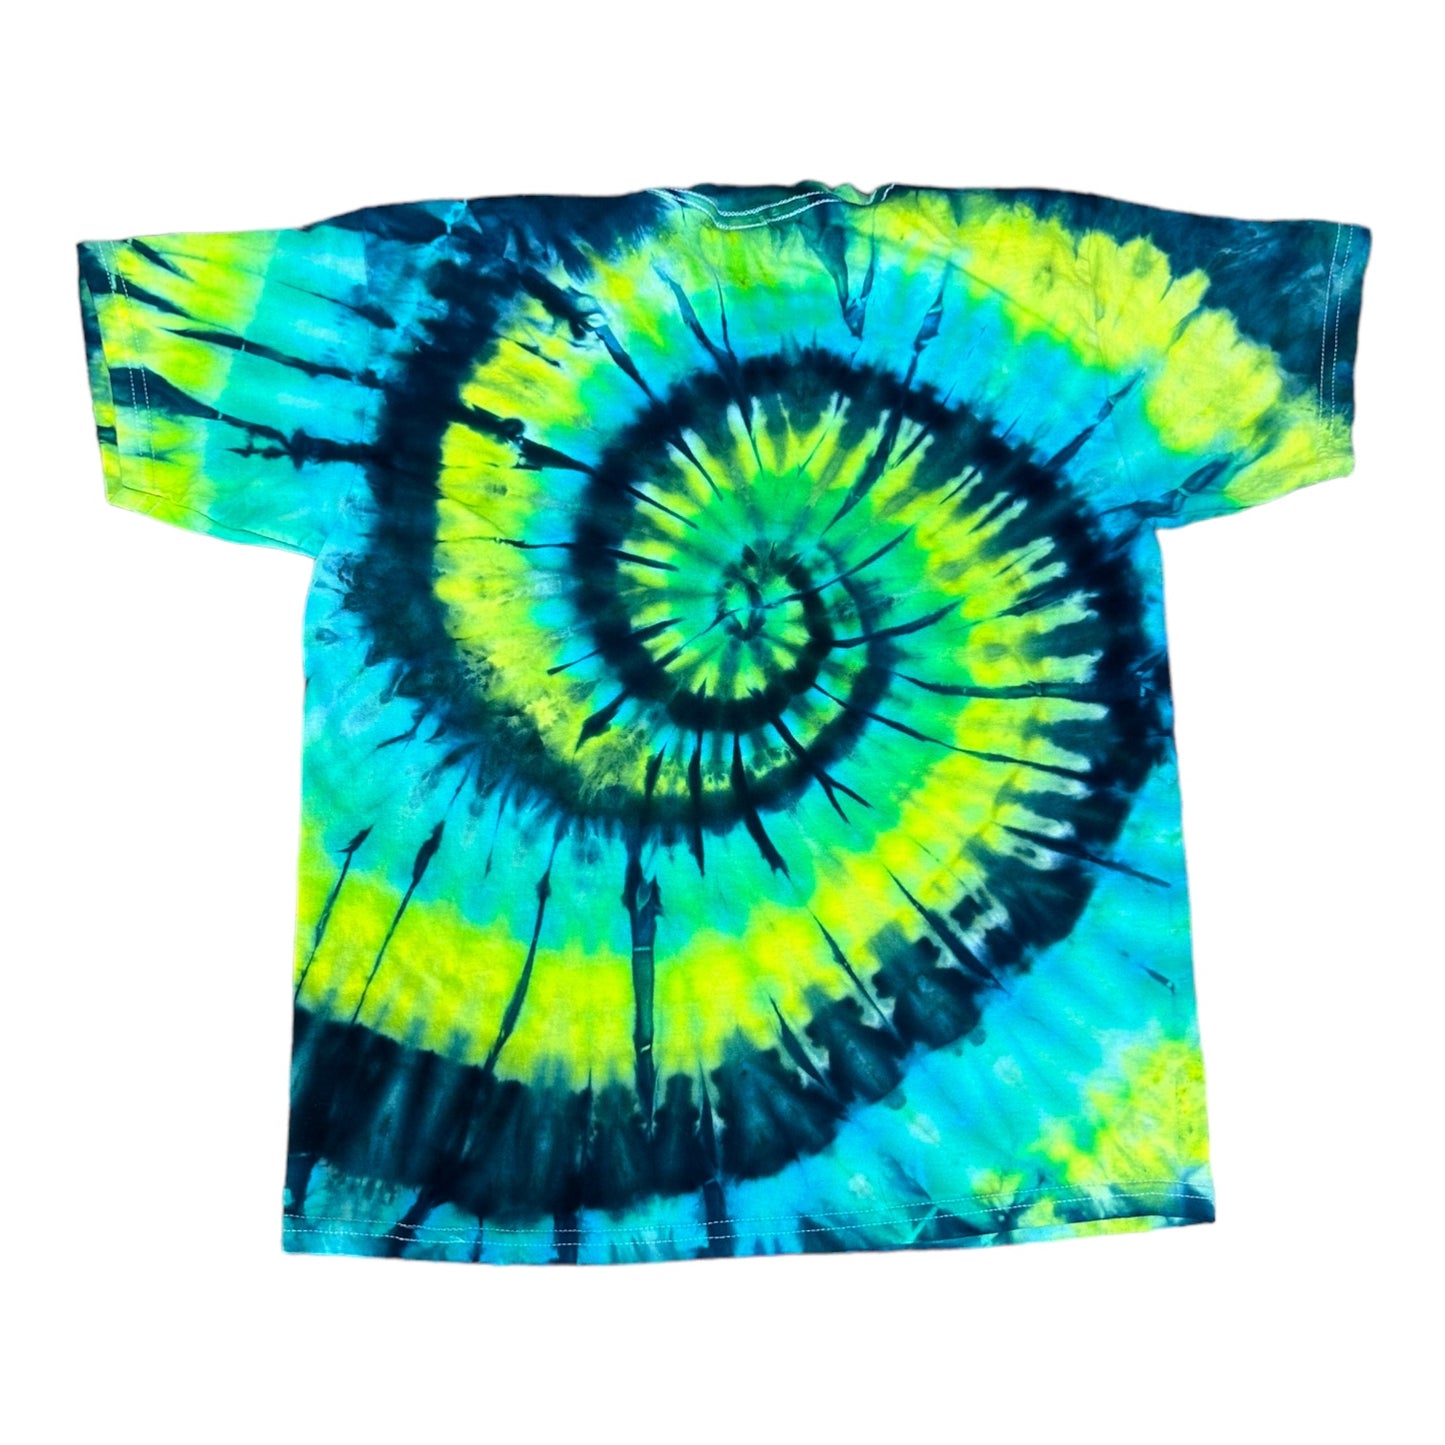 Youth XL Blue Green and Yellow Green Spiral Ice Dye Tie Dye Shirt